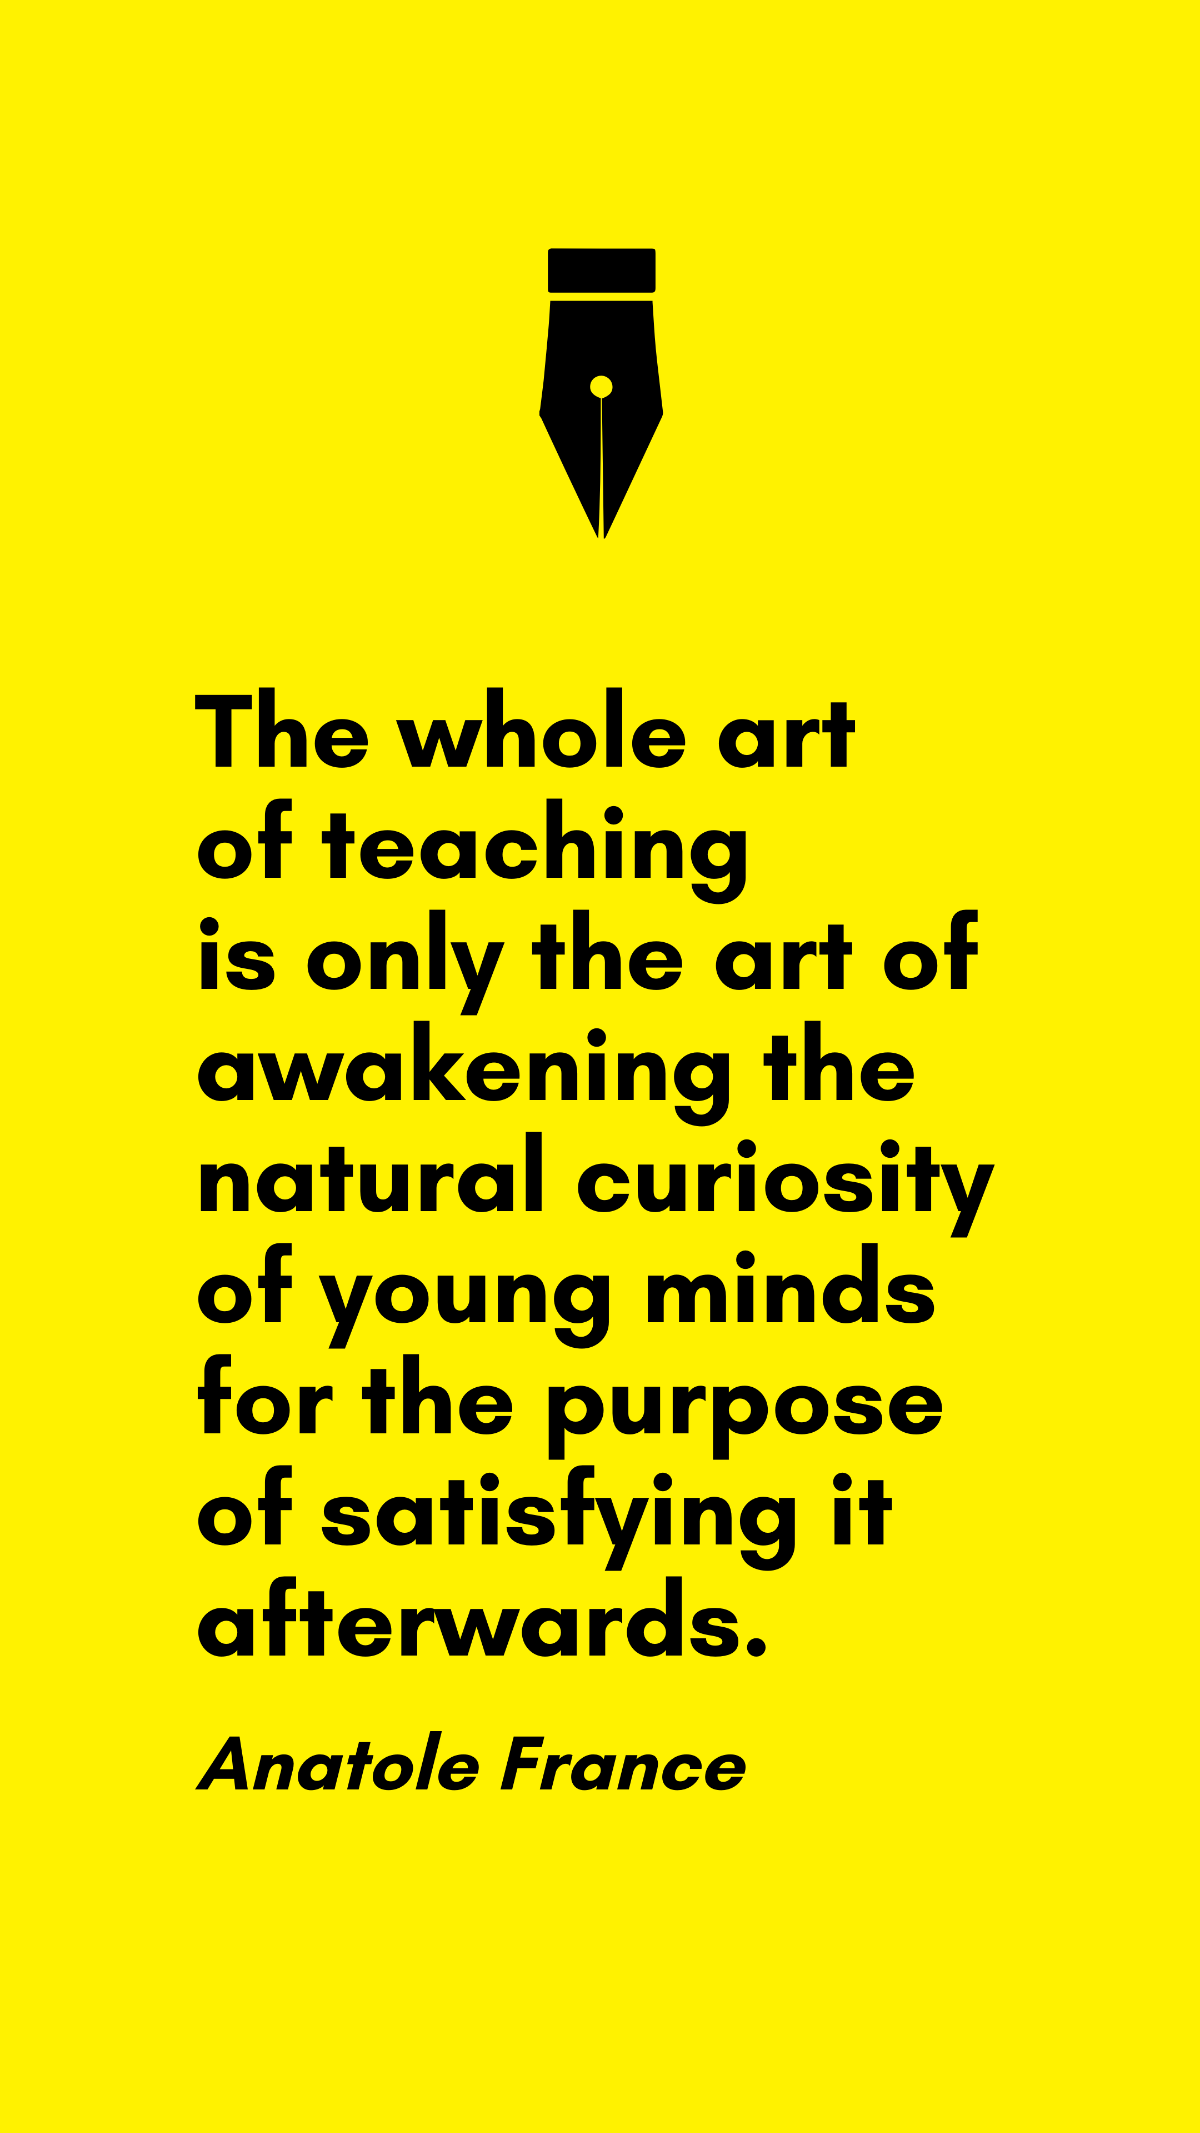 Anatole France - The whole art of teaching is only the art of awakening the natural curiosity of young minds for the purpose of satisfying it afterwards. Template